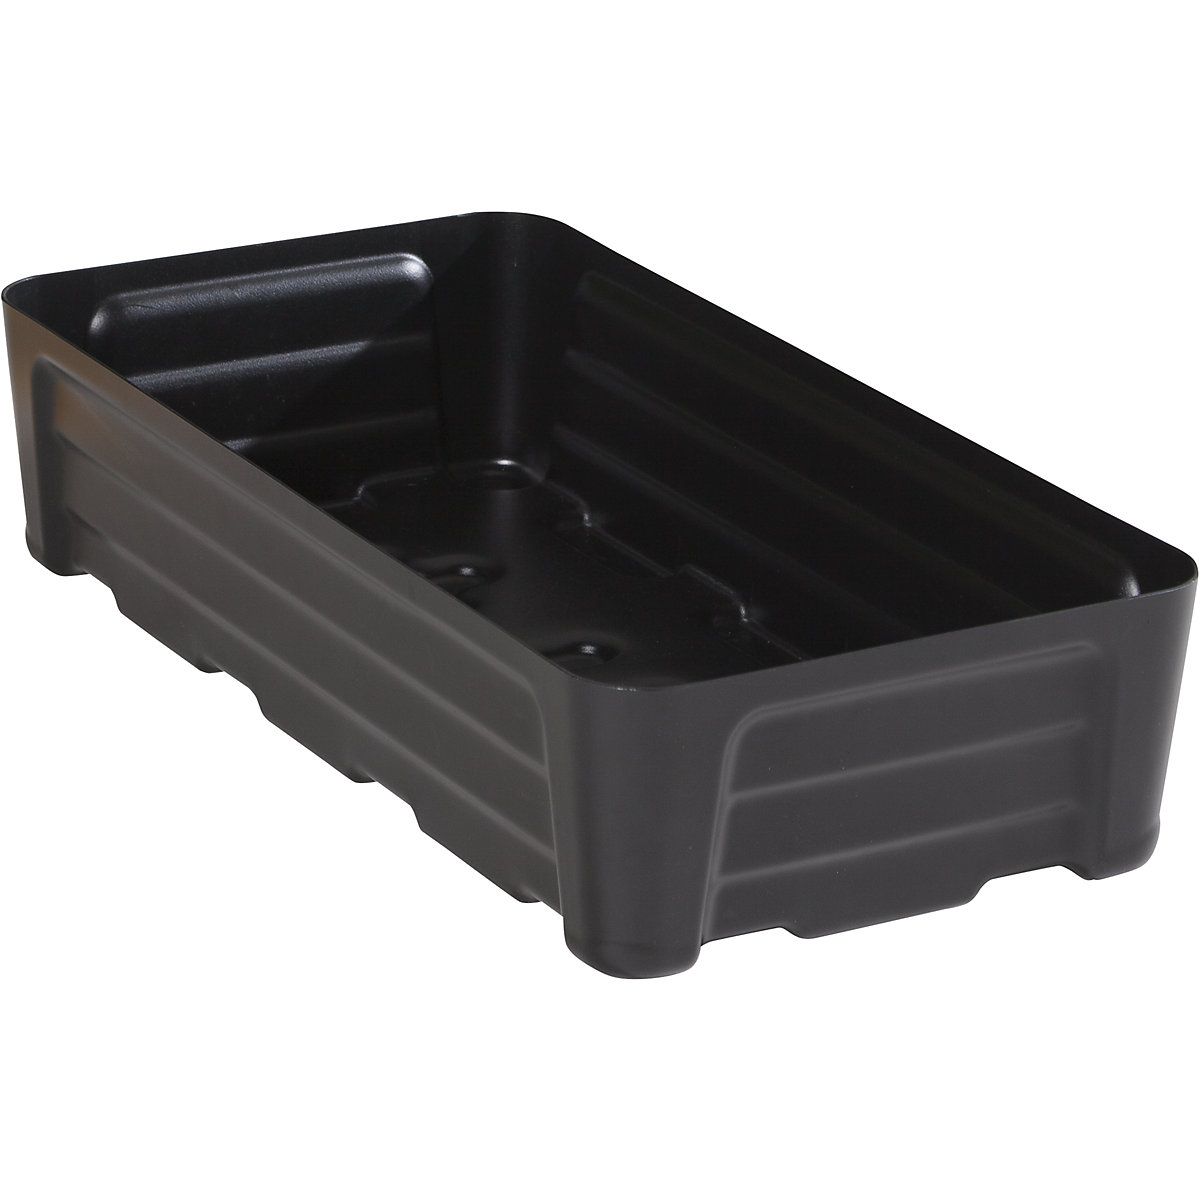 PE sump tray for small containers – eurokraft pro, without grate, collection capacity 40 l-5